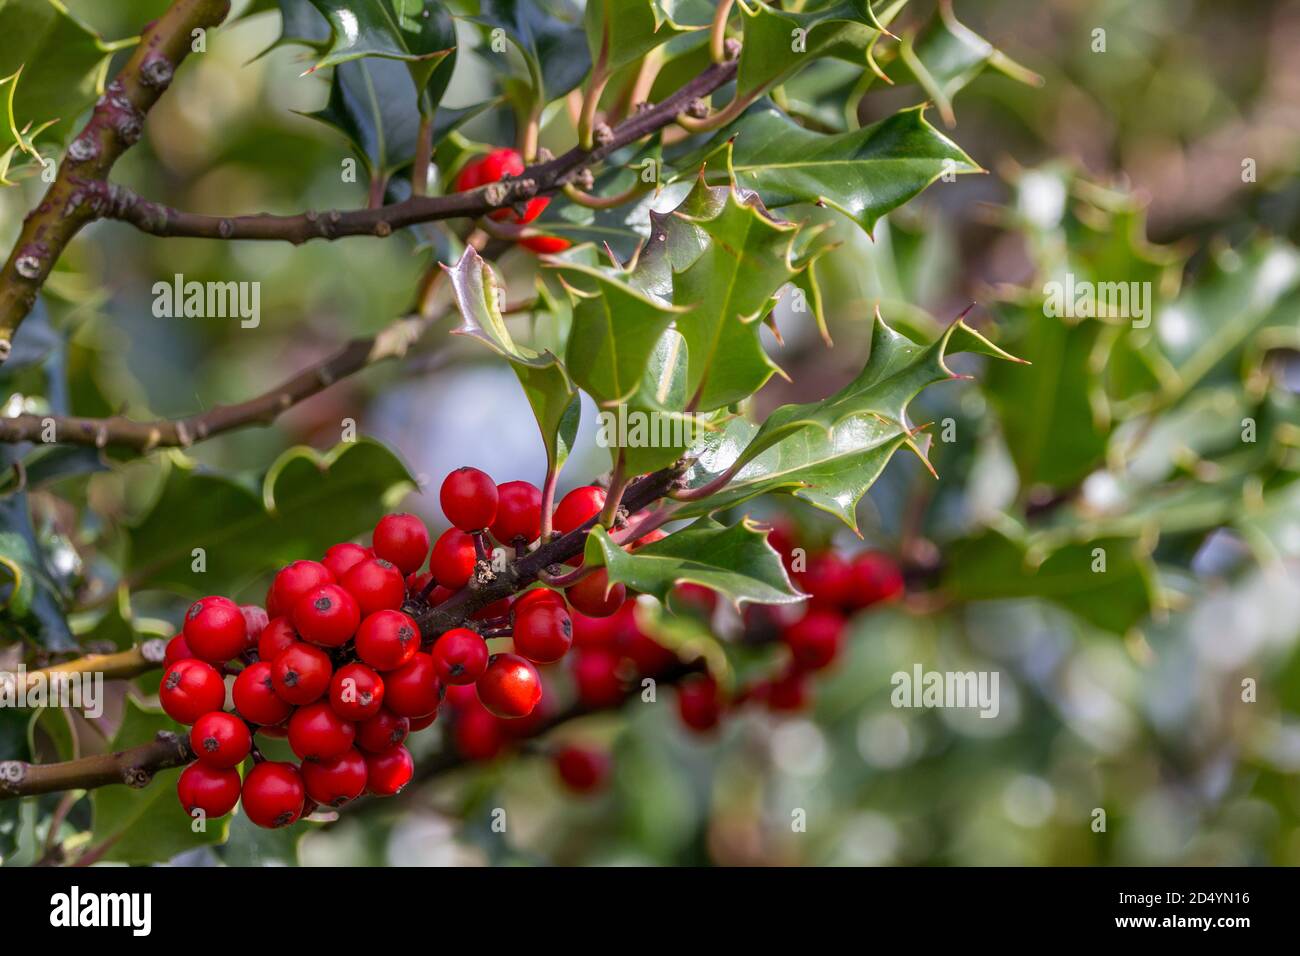 Holly and red berries Ilex aquifolium, seasonal decoration at christmas. Stiff leathery leaves with spiny margins dark green above paler below. Stock Photo